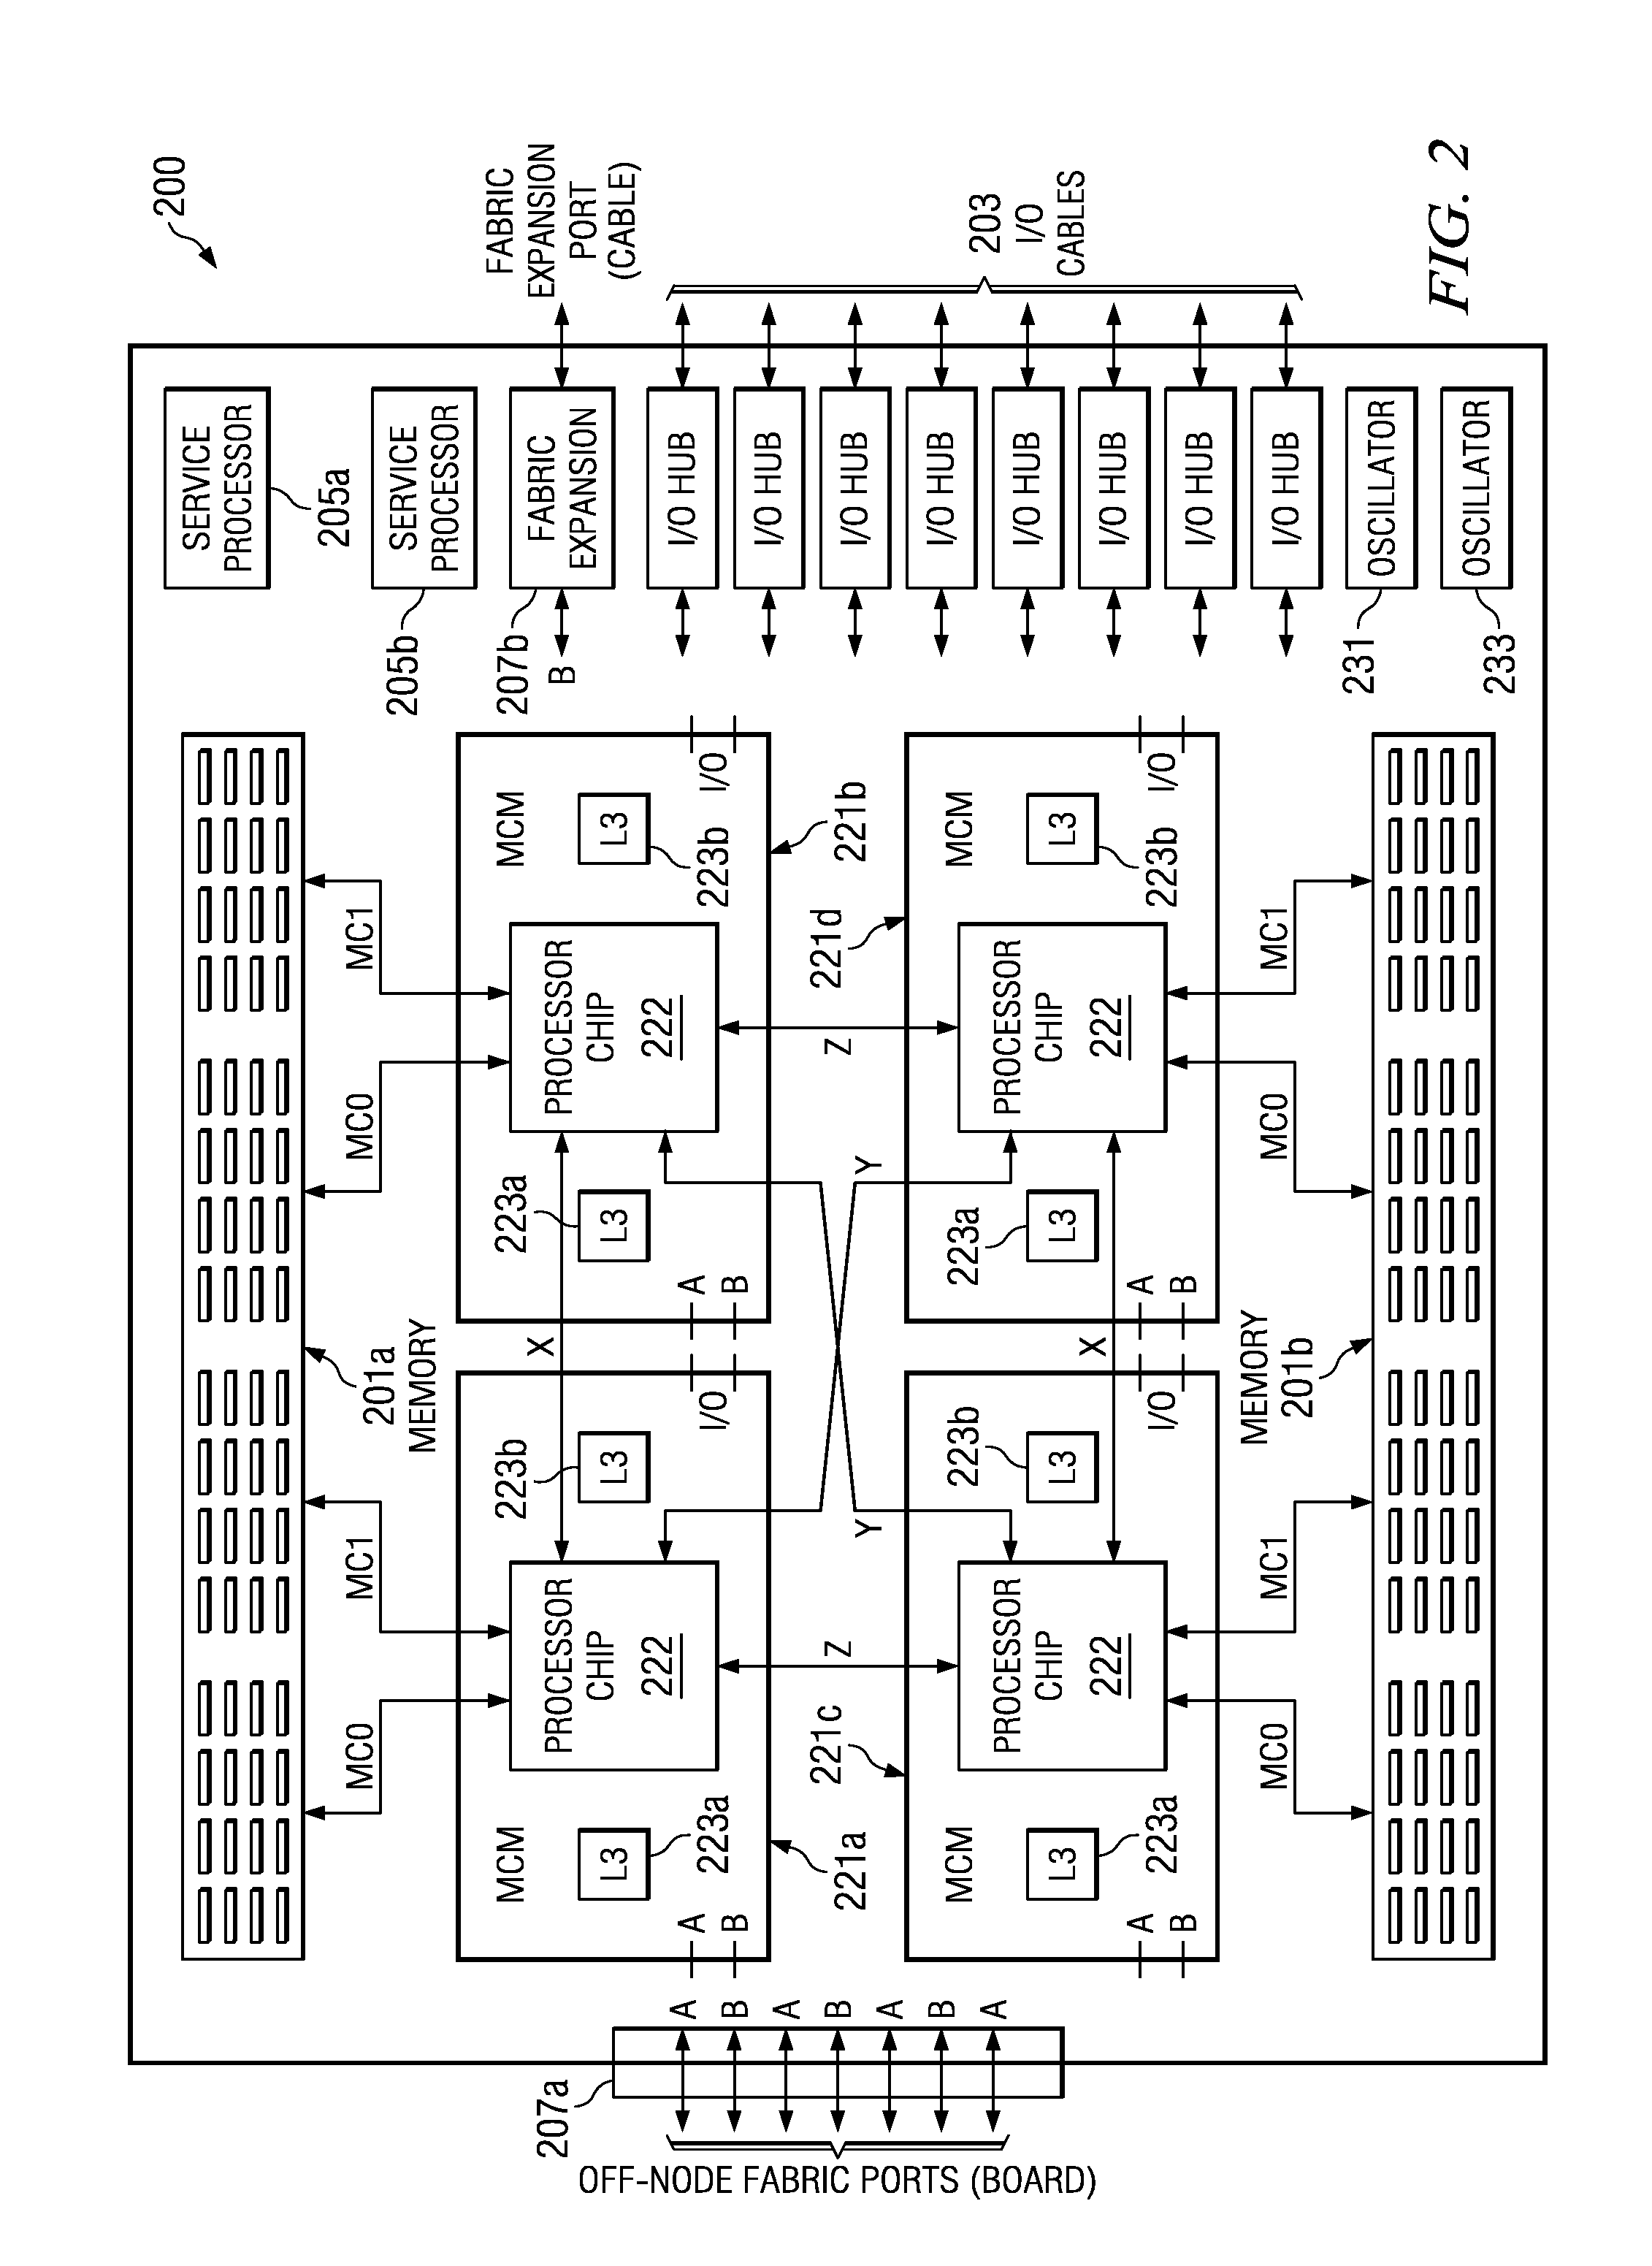 Method for Fault Tolerant Time Synchronization Mechanism in a Large Scaleable Multi-Processor Computer